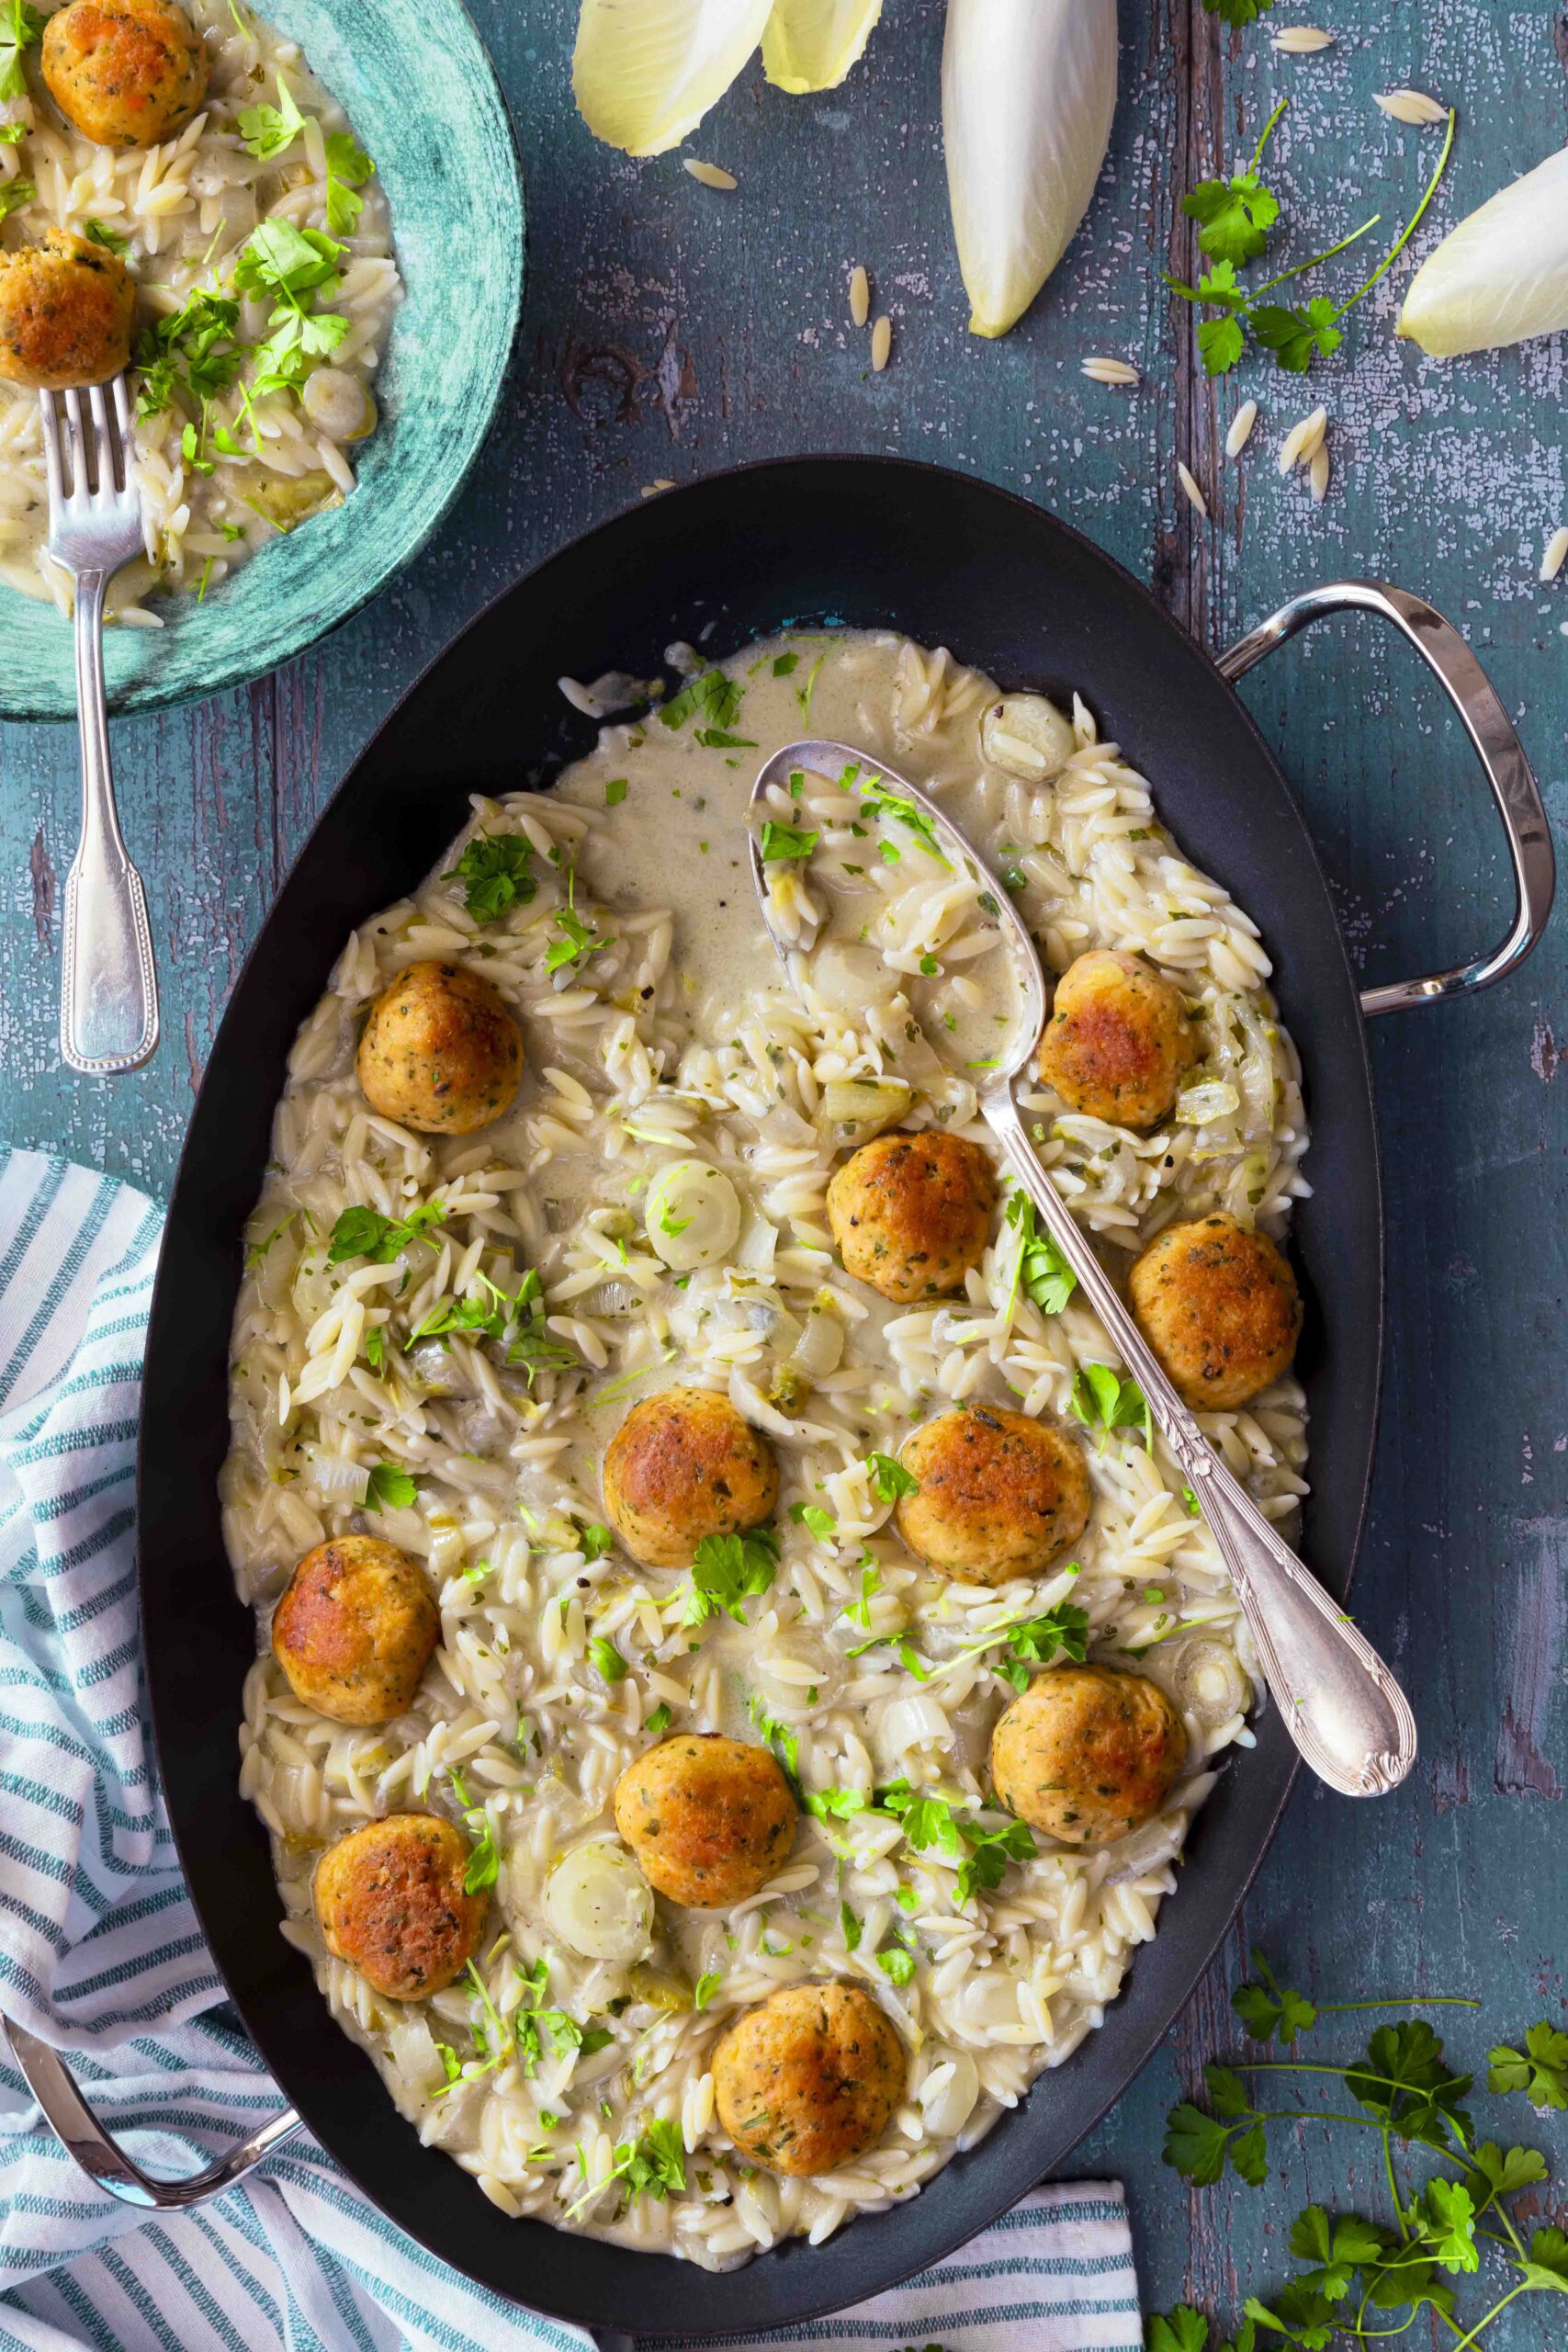 Orzo pasta with endive and spicy salmon balls